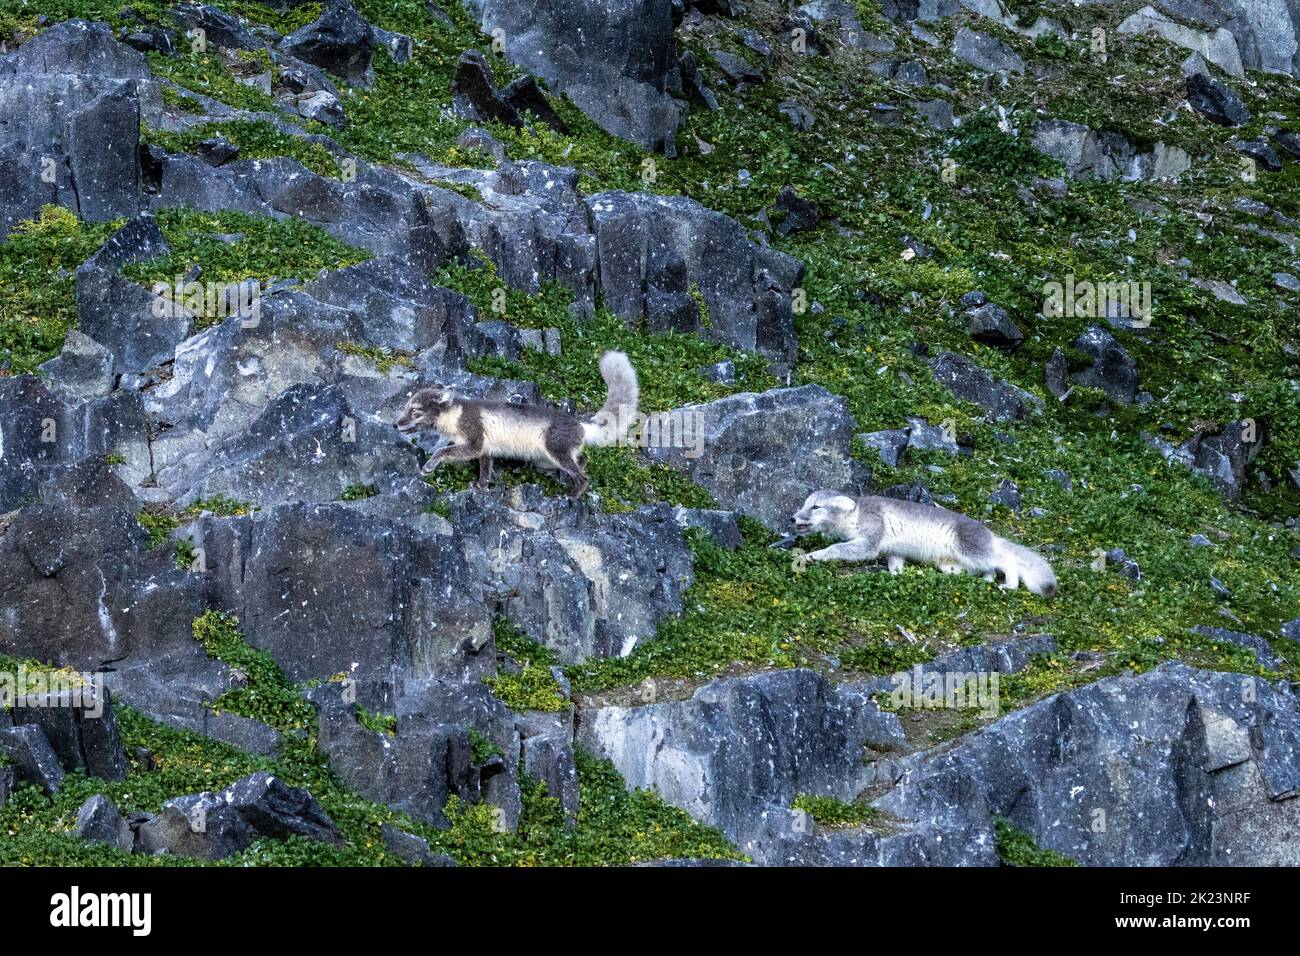 A couple of Arctic Fox (Vulpes lagopus) adult in summer pelage, in the tundra Spitsbergen, Svalbard, Norway Stock Photo